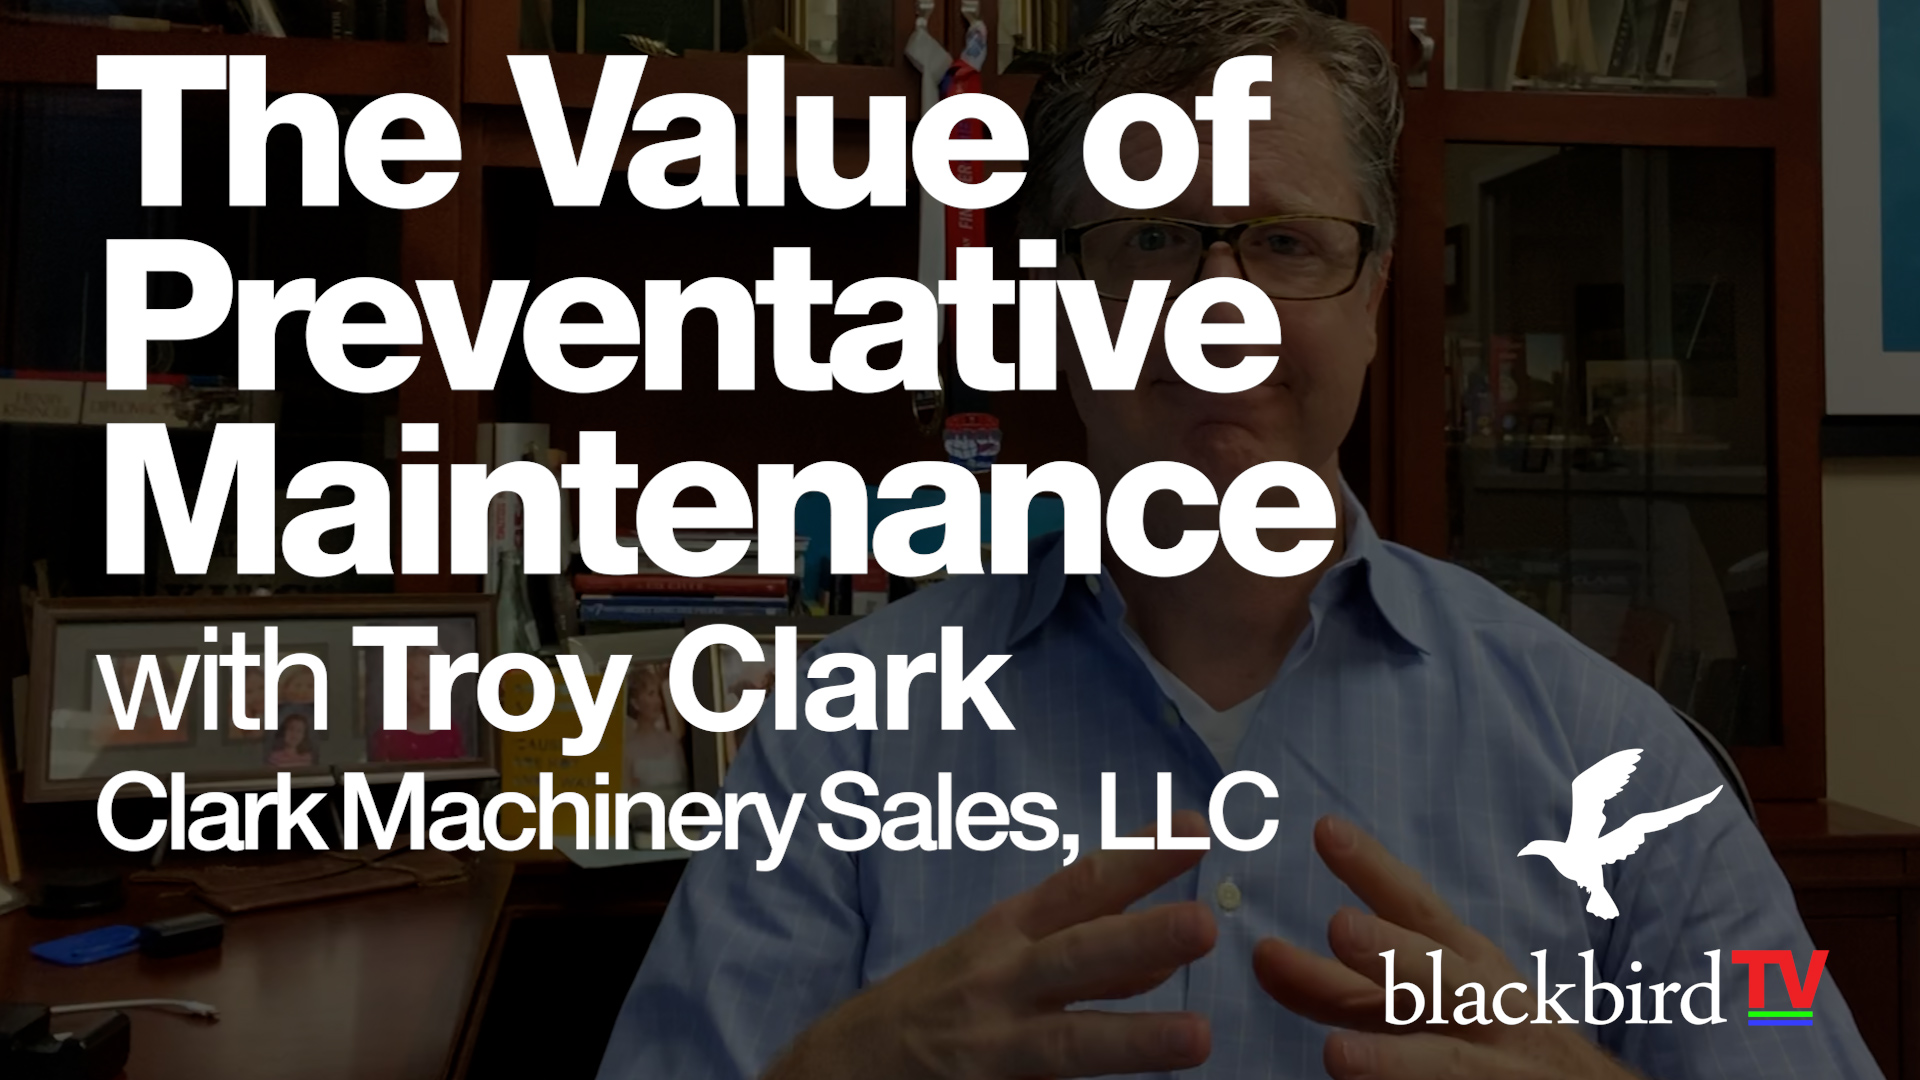 The Value of Preventative Maintenance with Troy Clark of Clark Machinery Sales